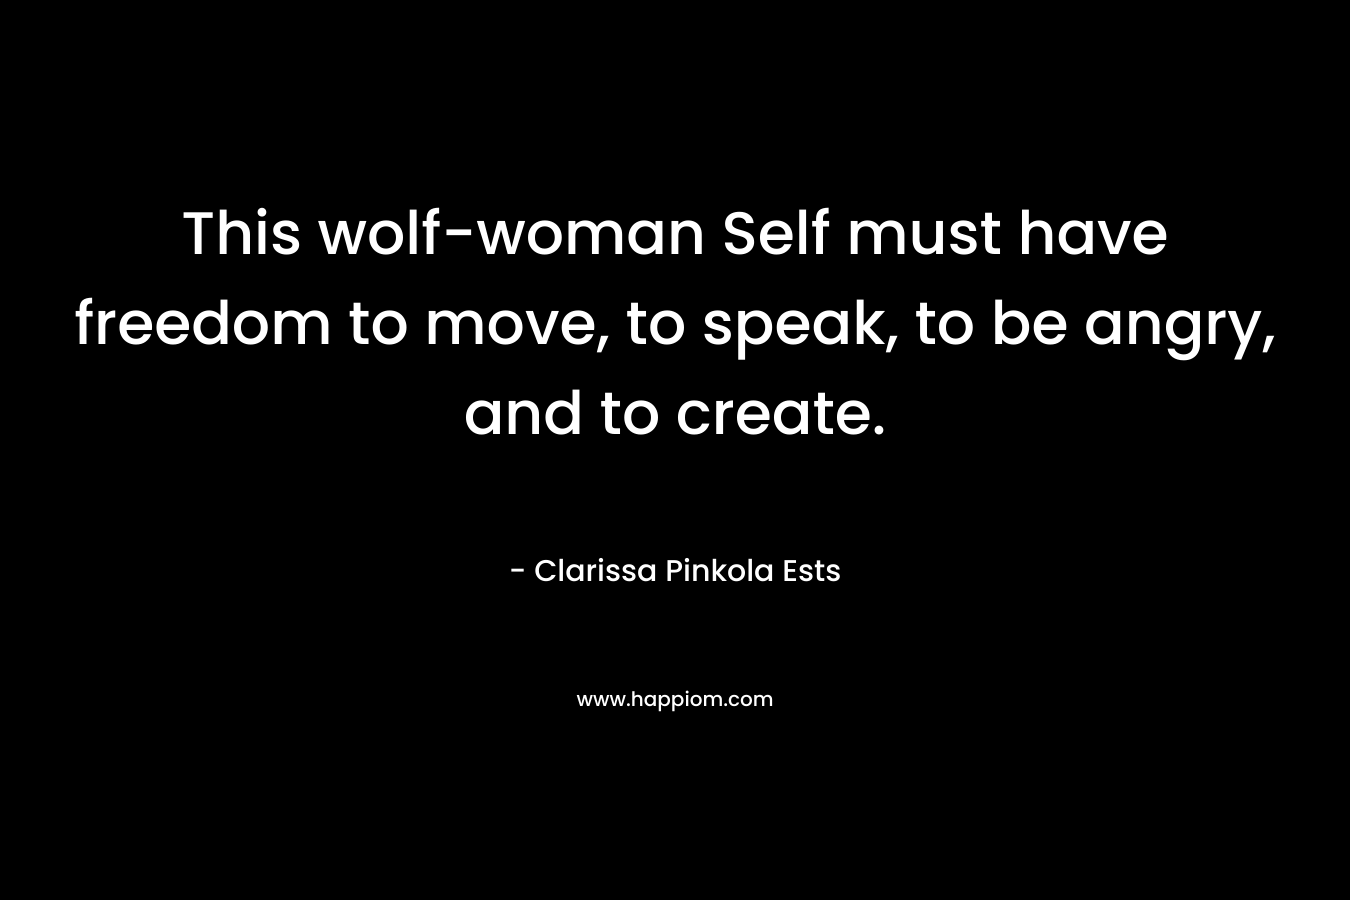 This wolf-woman Self must have freedom to move, to speak, to be angry, and to create.